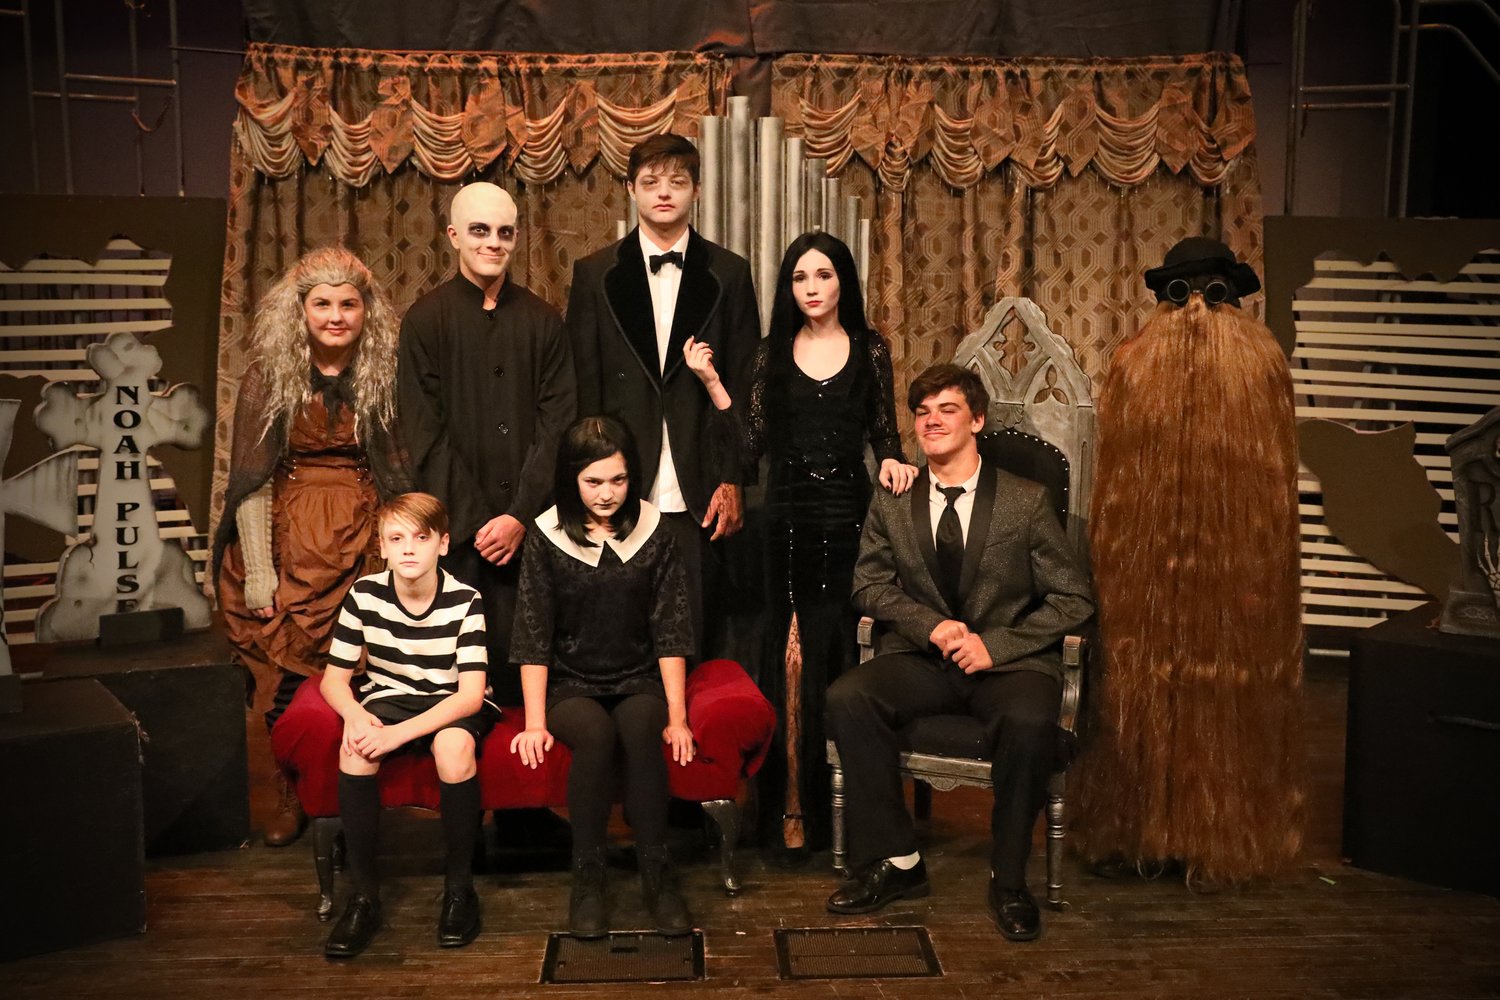 The cast of Southmont Jr. High's production of "The Addams Family" will take the stage this weekend in the Southmont auditorium.